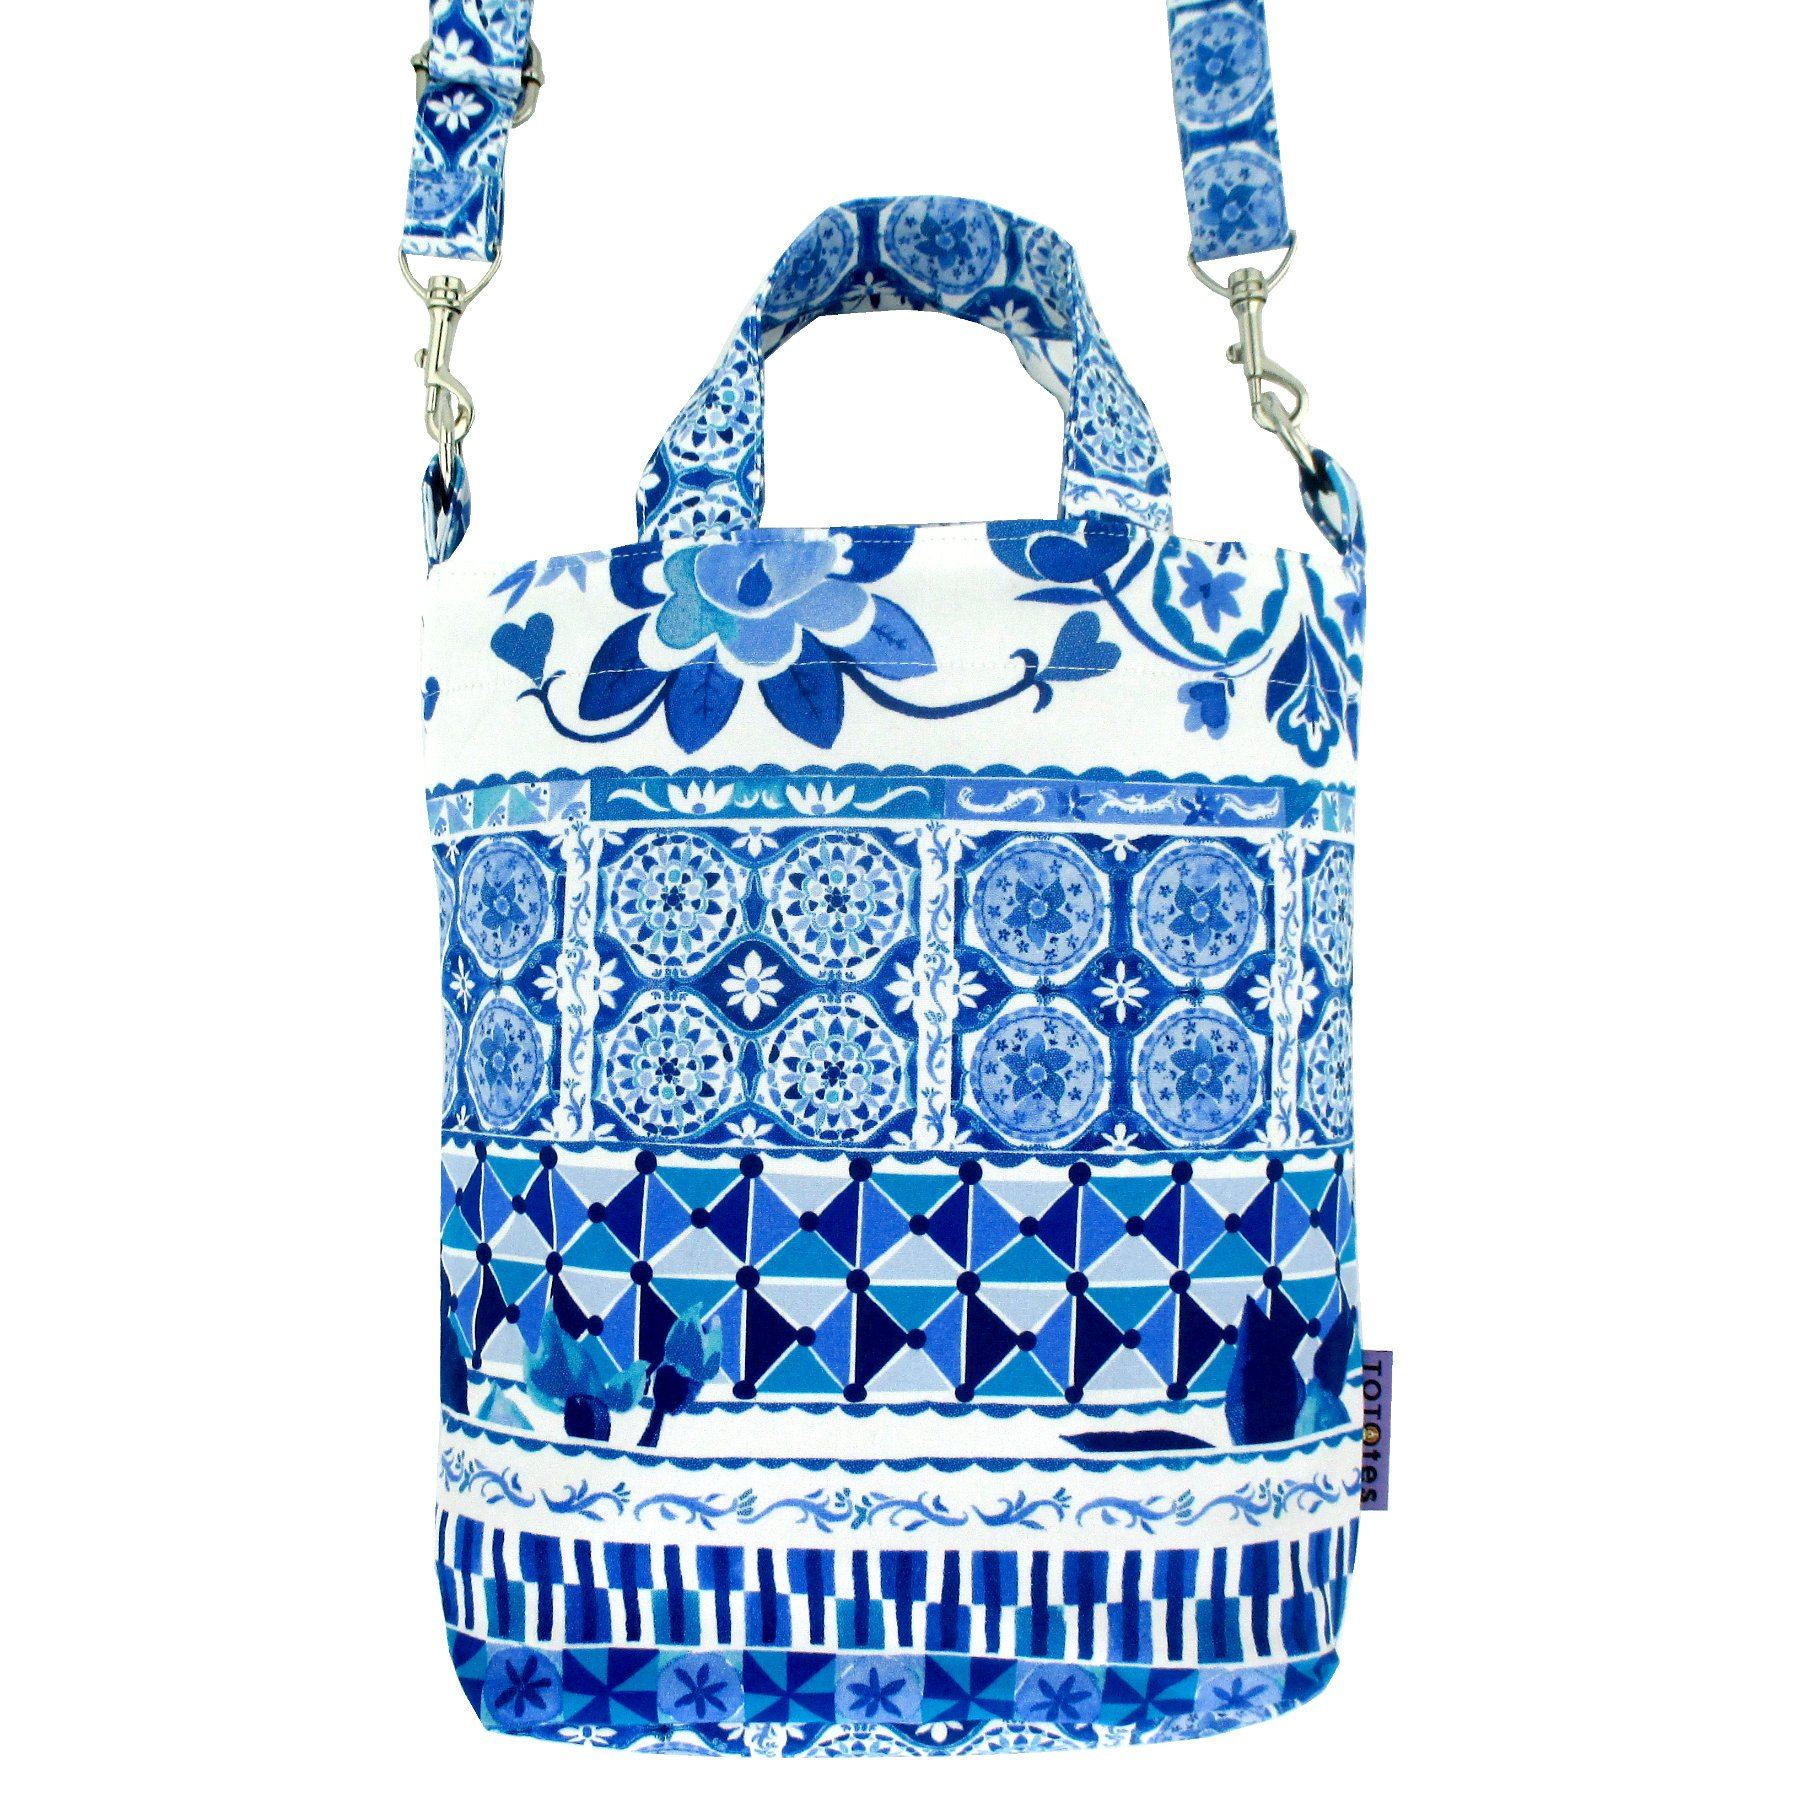 Bright Blue Paisley Floral Mosaic Tiles Patterned Print Duck Cross Body Tote Bag